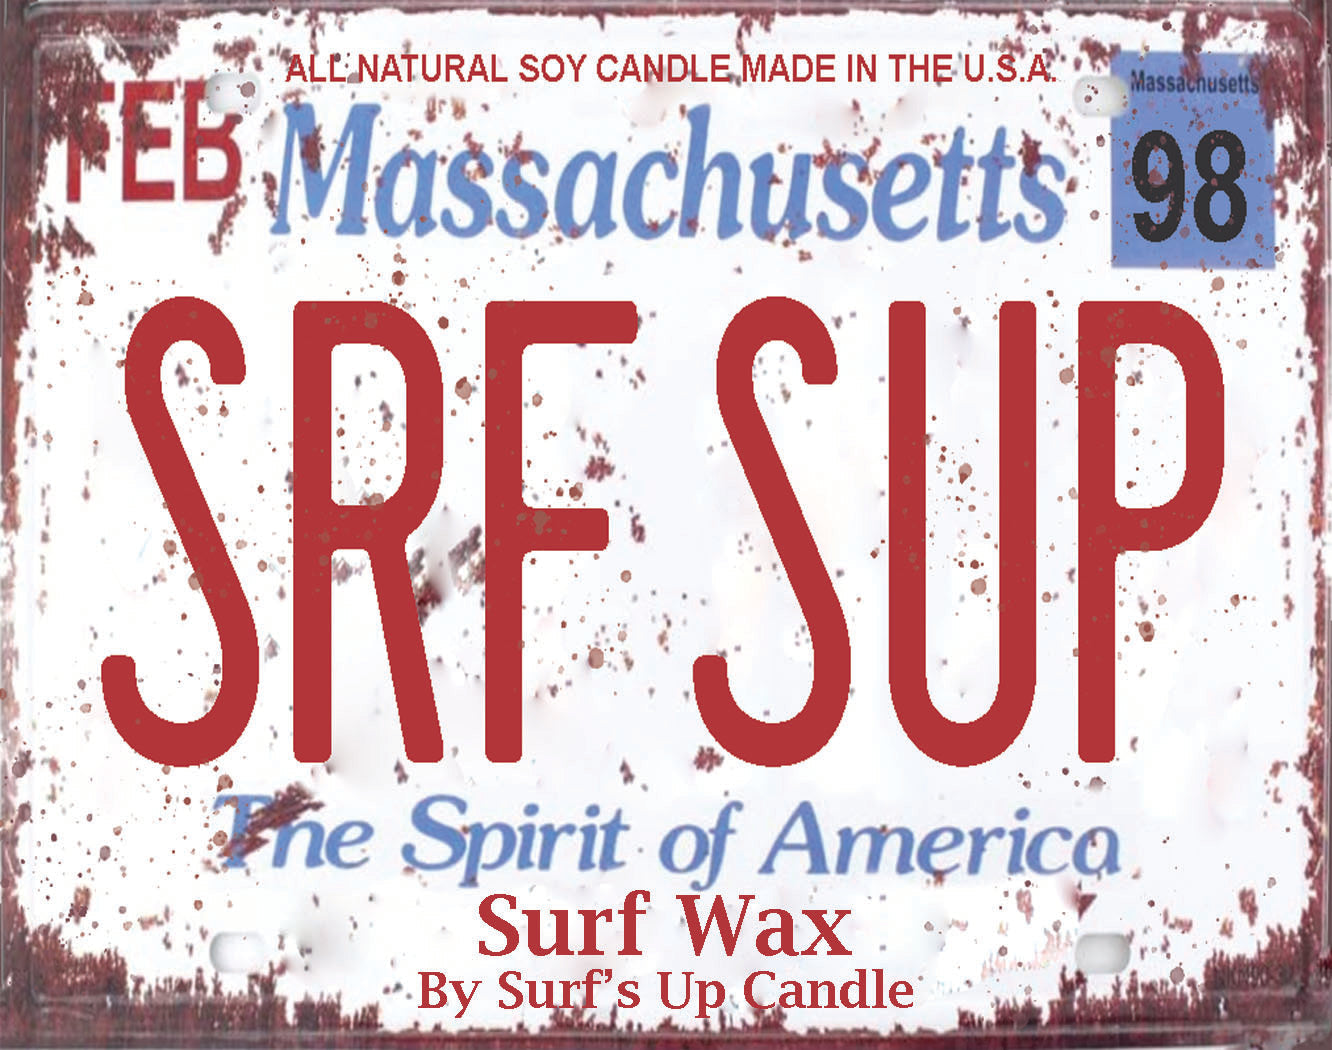 Massachusetts License Plate Paint Can Candle